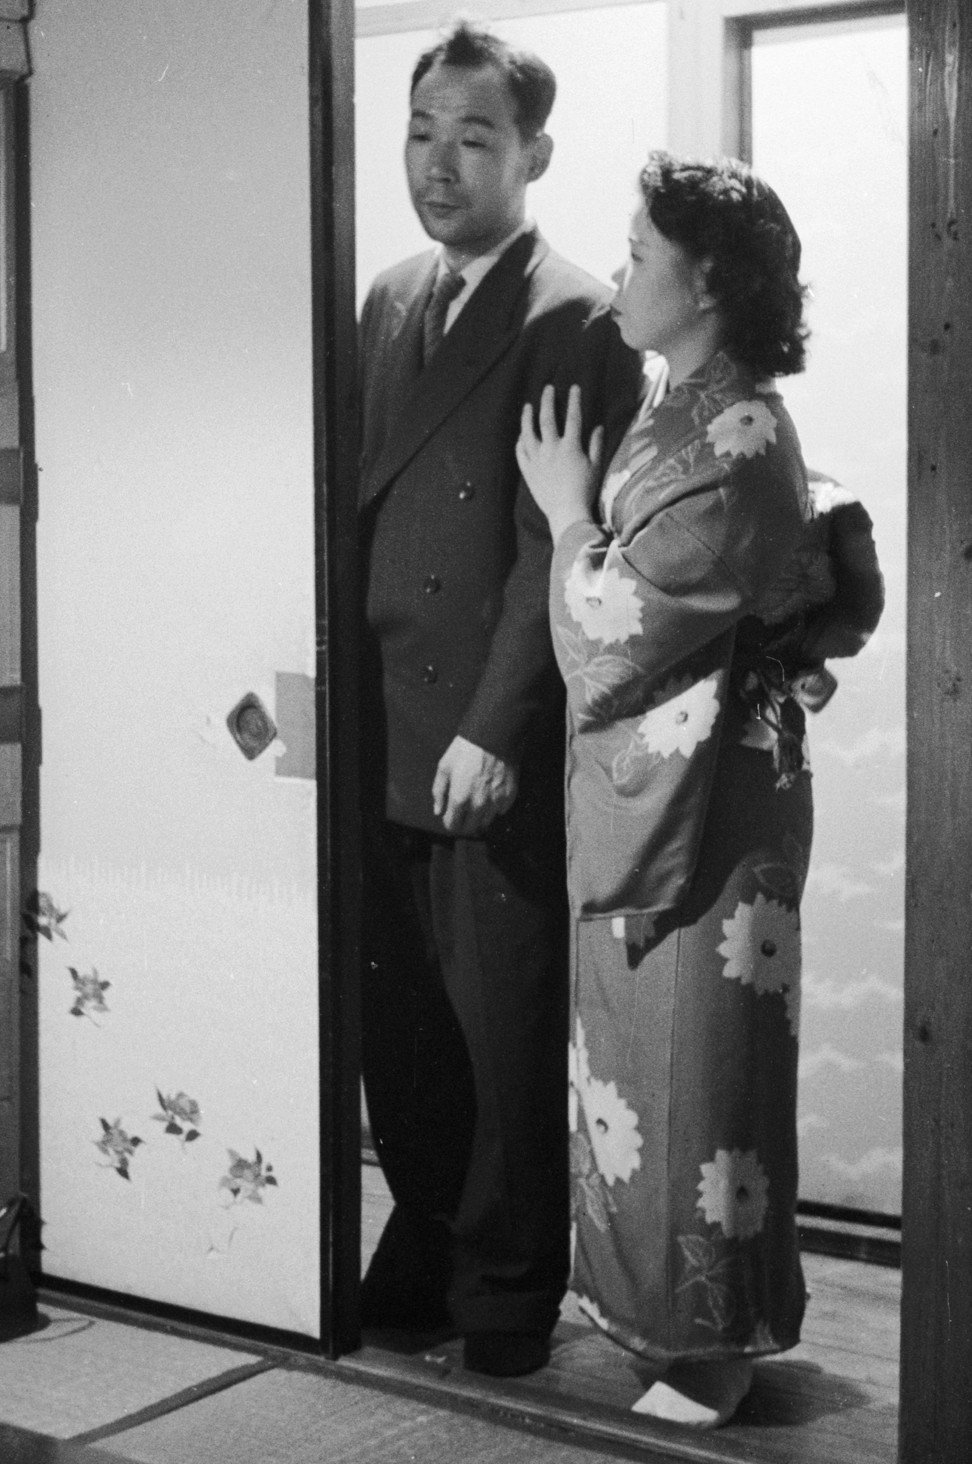 A Japanese prostitute from Yoshiwara, the red light district of Tokyo in the 1960s, shows her client into a private bedroom. Photo: Getty Images